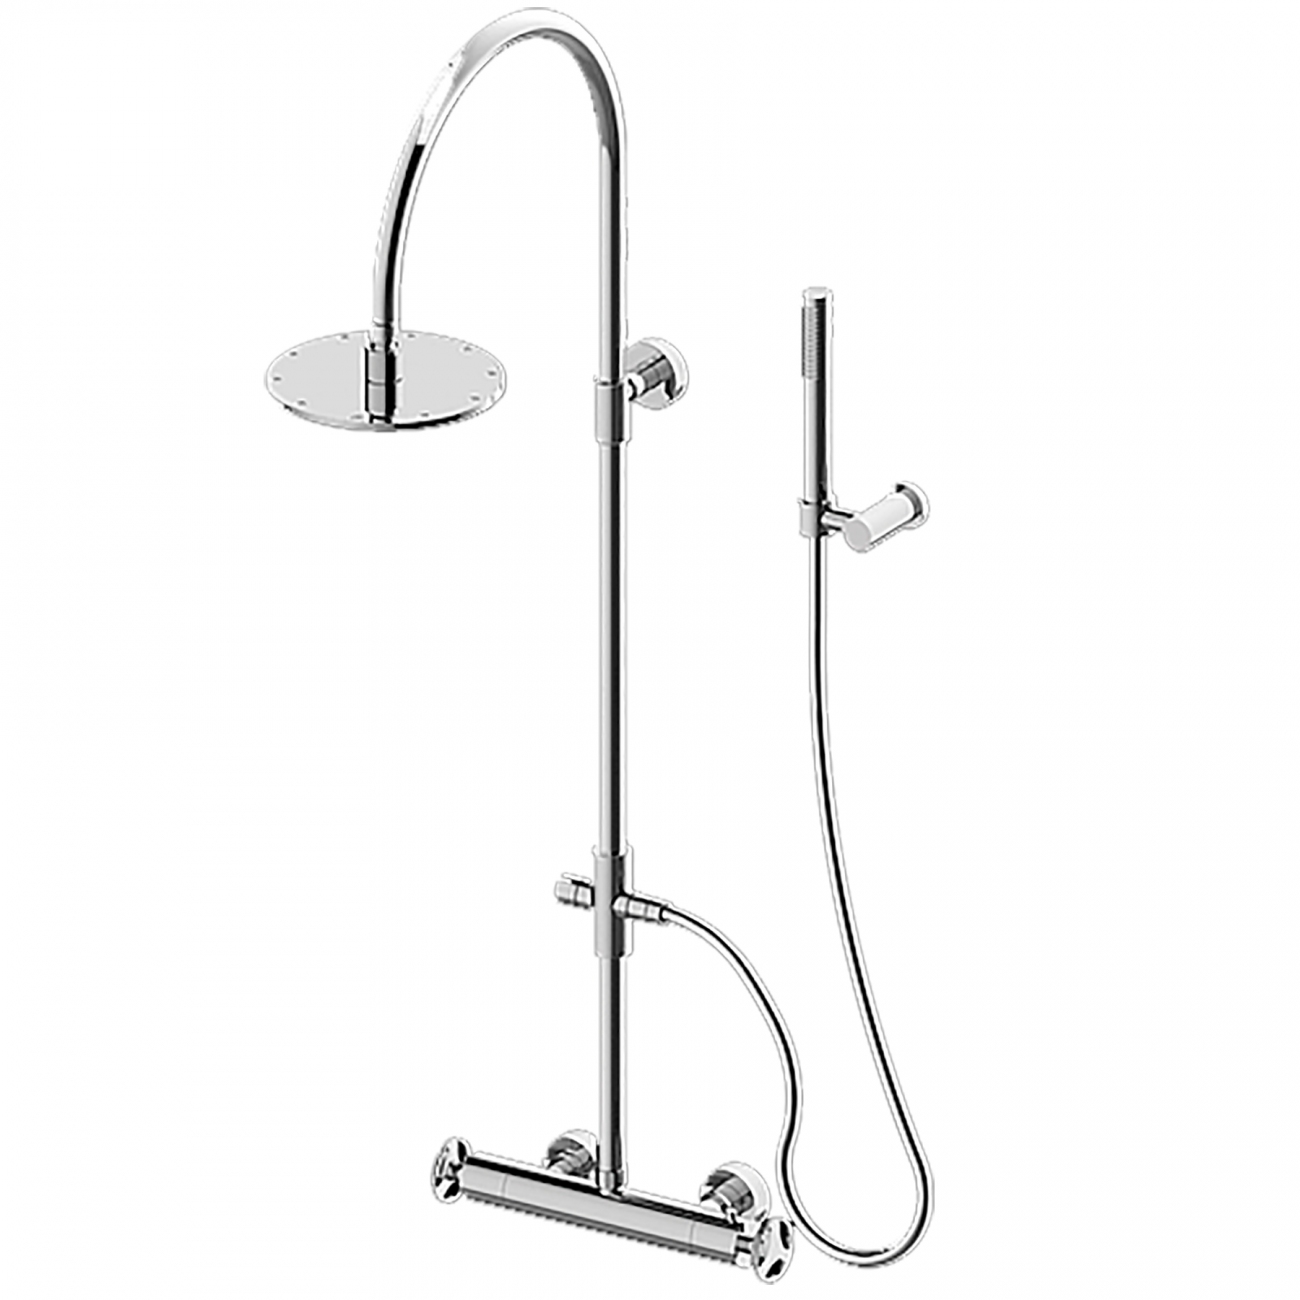 Graff Harley wall mounted thermostatic shower column